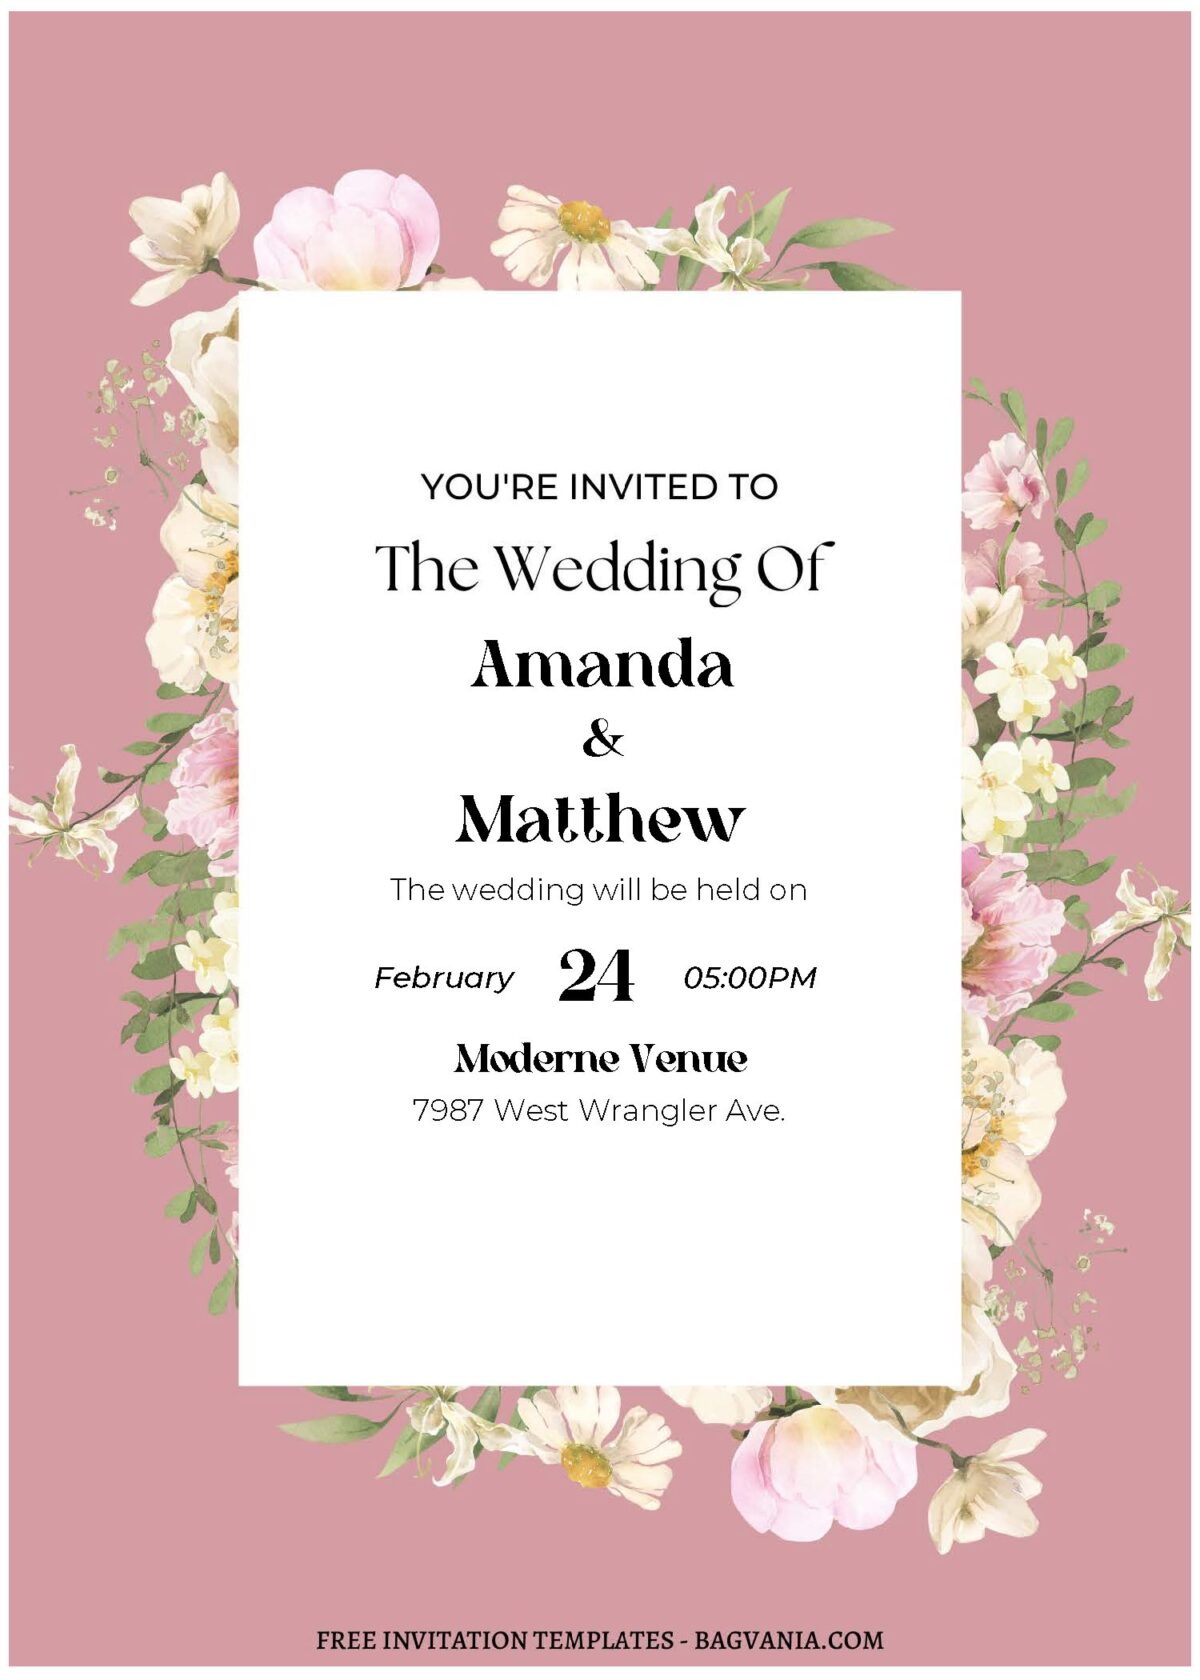 (Free Editable PDF) Pastel Floral Frame Wedding Invitation Templates with enchanting white lily